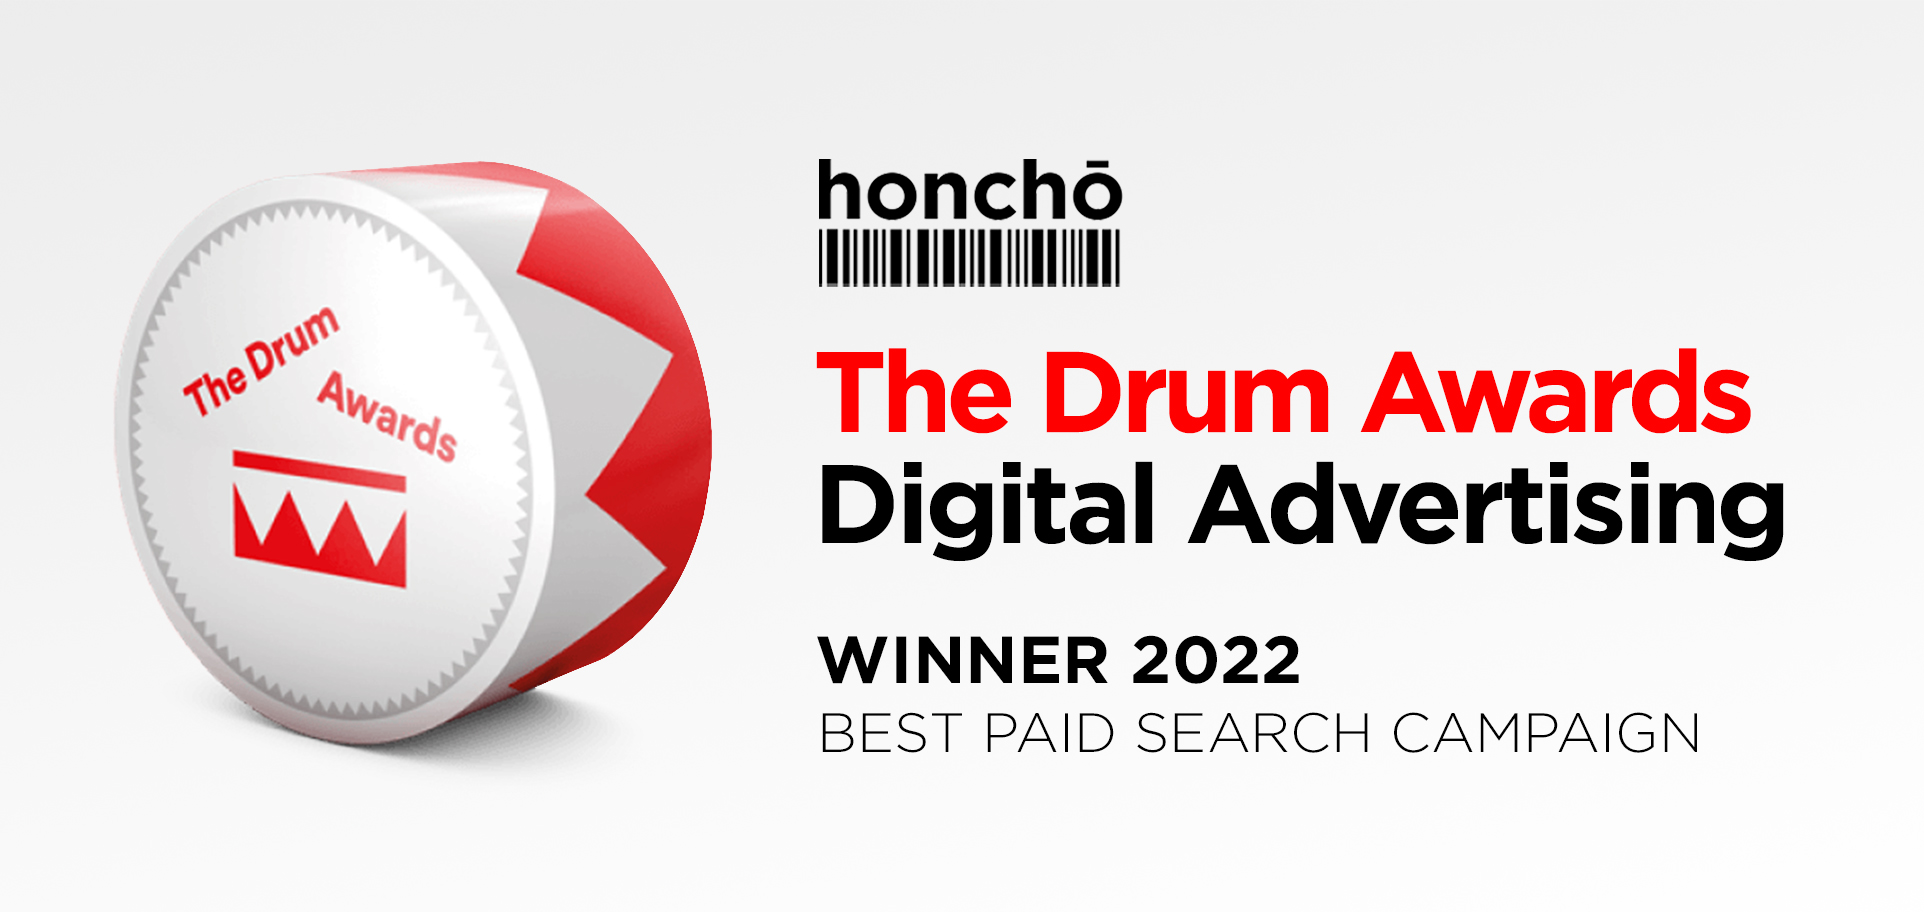 Honcho Wins Best Paid Search Campaign at the Drum Digital Advertising Awards